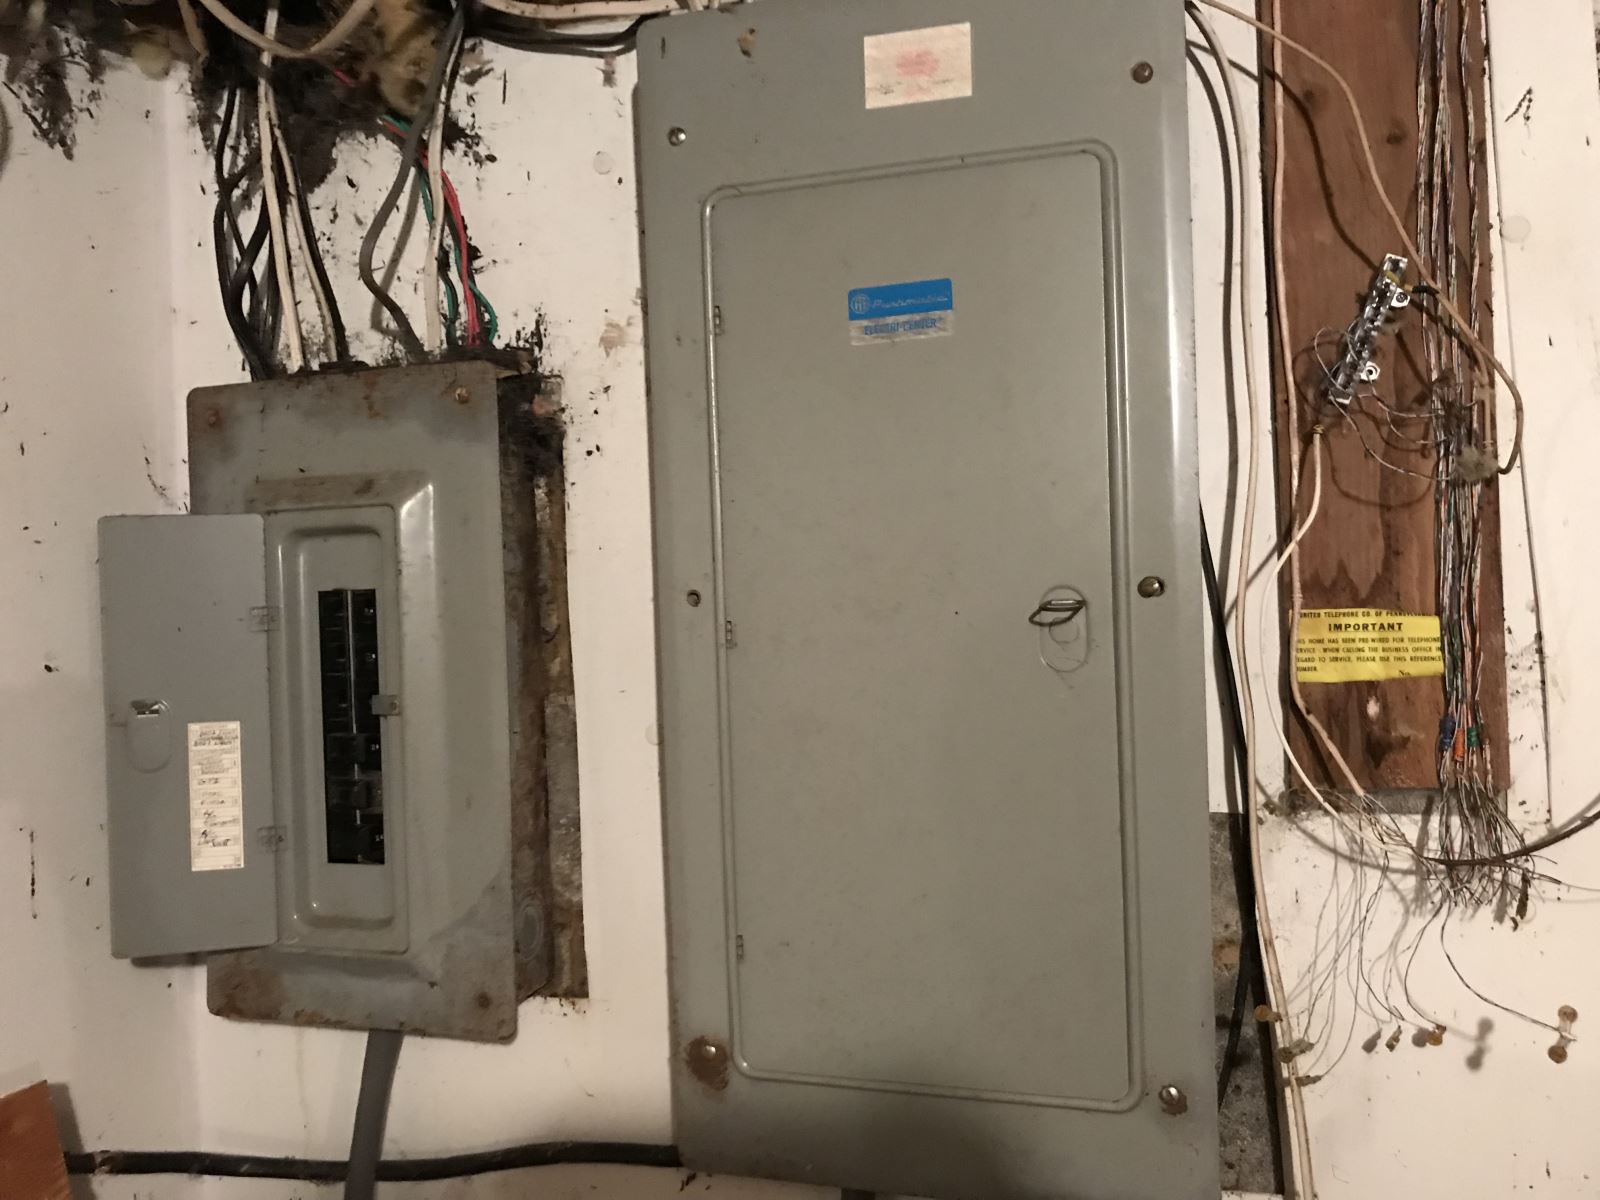 Water Damage to Electrical Panel